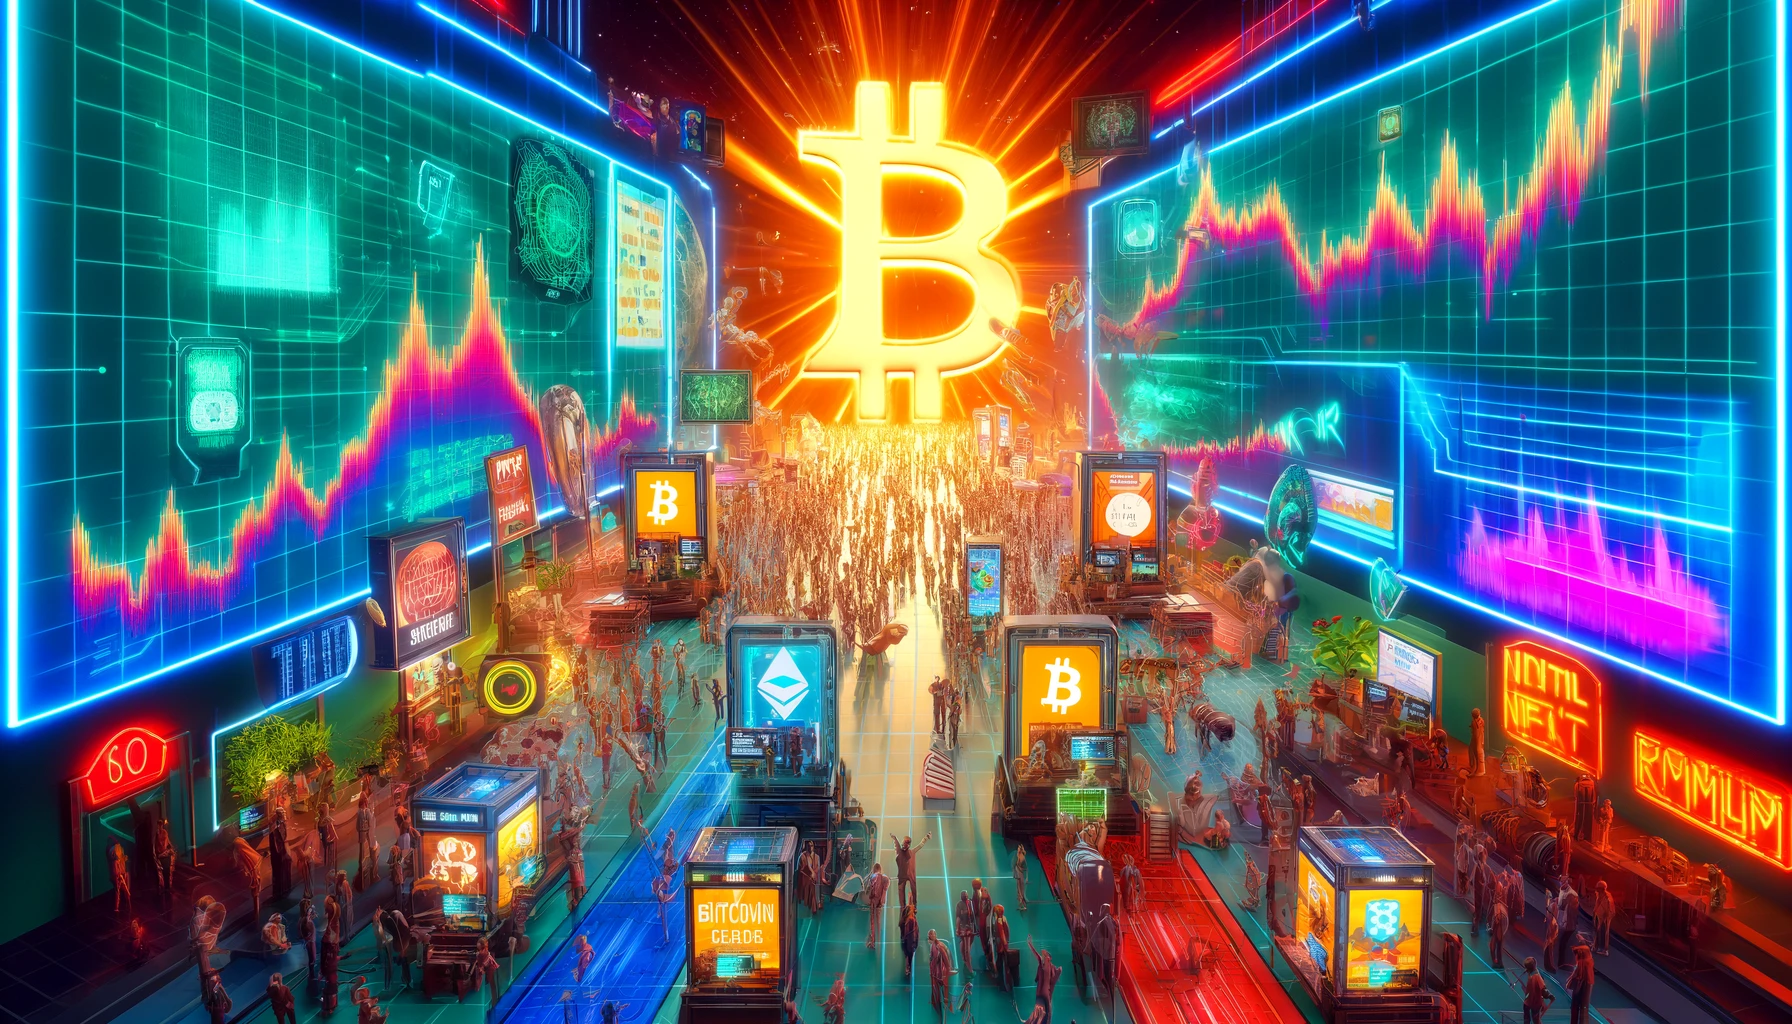 DALL·E 2024-04-23 20.57.49 - A vibrant and dynamic digital art scene depicting the surge in the NFT market led by Bitcoin. The artwork features a bustling virtual marketplace fill